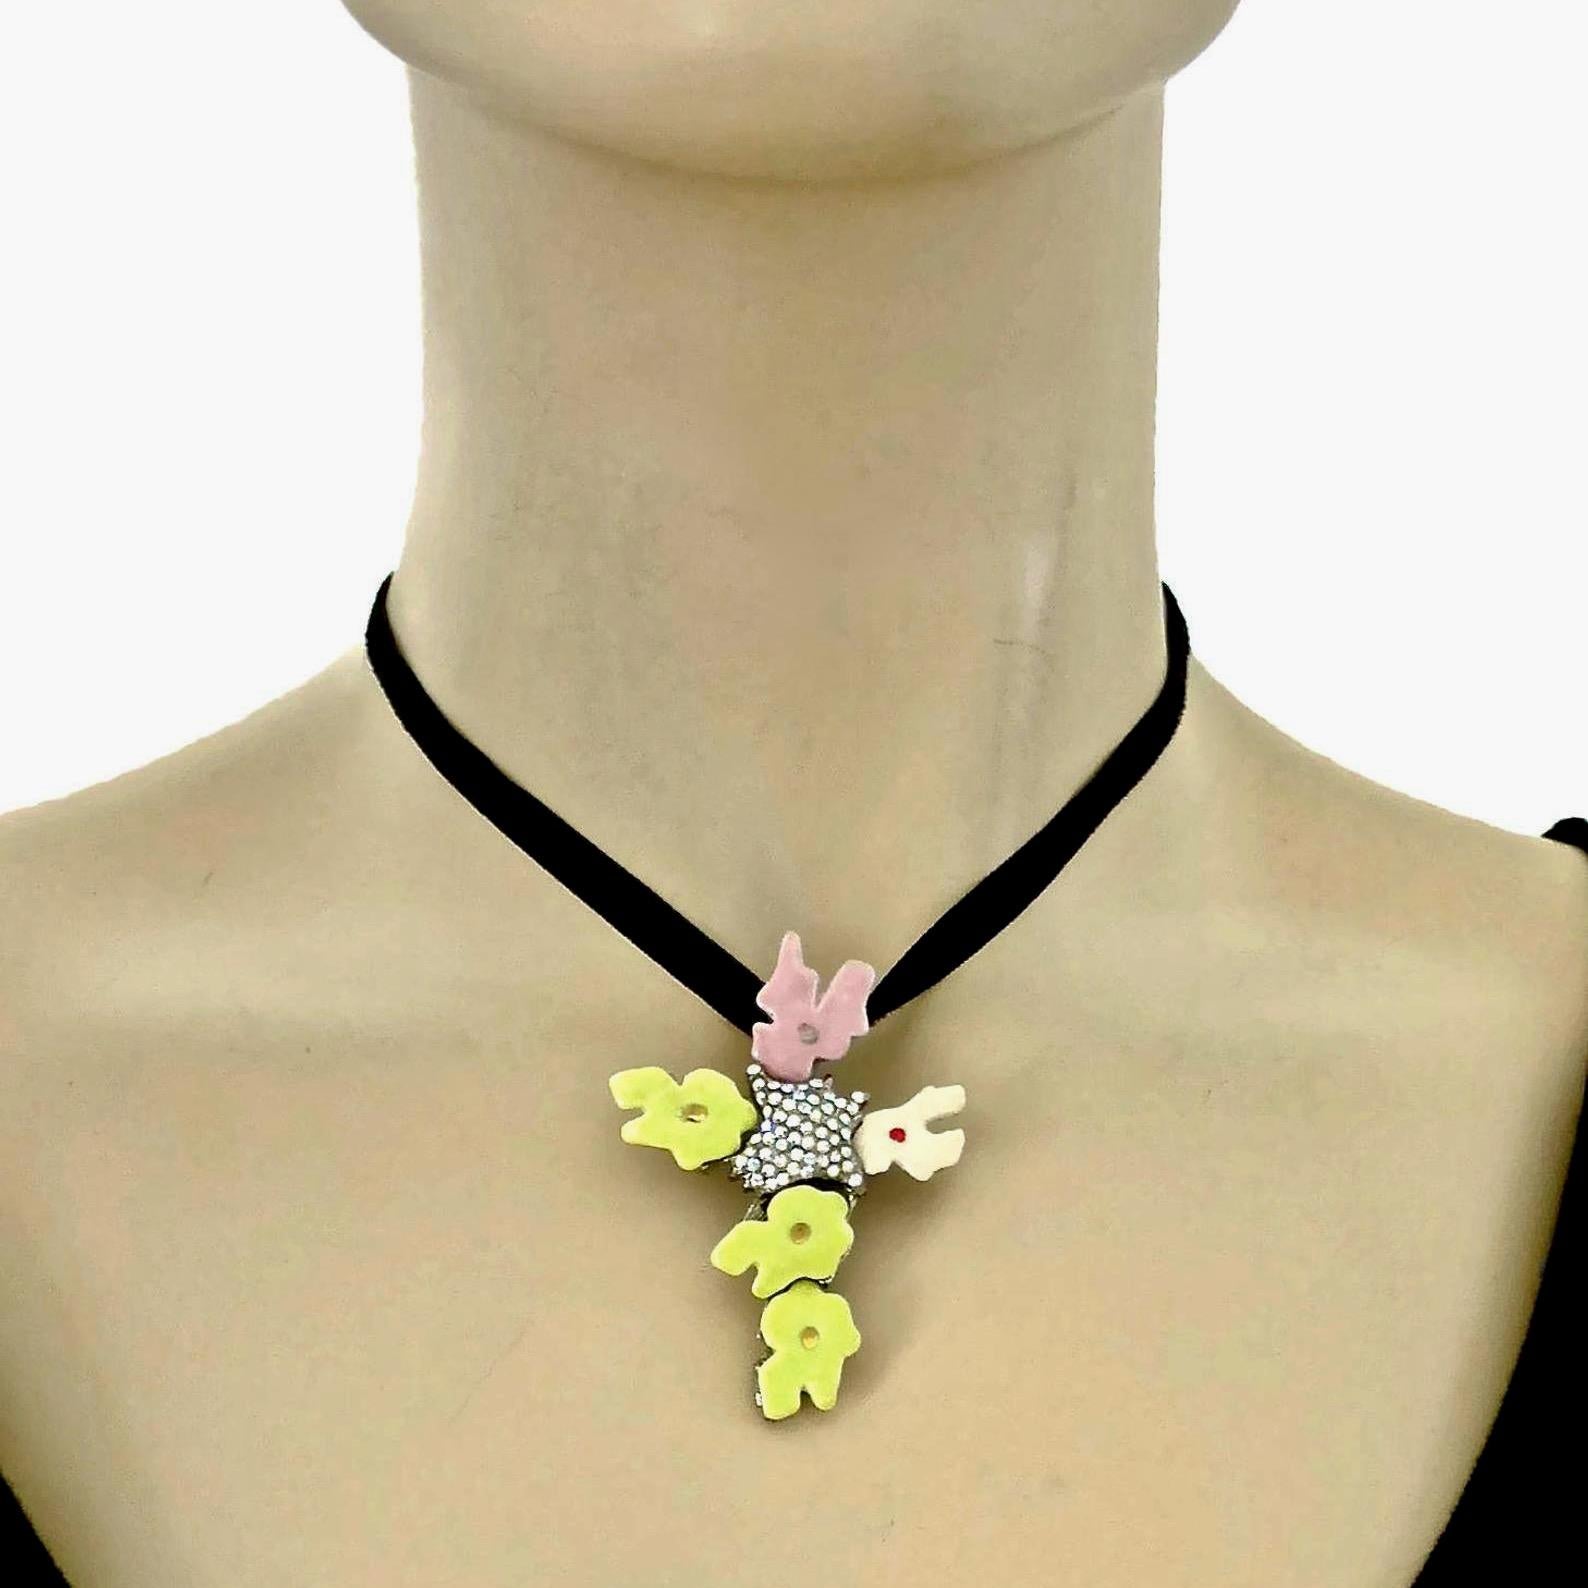 Vintage CHRISTIAN LACROIX Pop Abstract Pastel Rhinestone Cross Pendant Brooch Necklace

Measurements:
Height: 2.36 inches (6 cm)
Width: 1.65 inches (4.2 cm)

Features:
- 100% Authentic CHRISTIAN LACROIX.
- Pop abstract cross pendant and brooch.
-